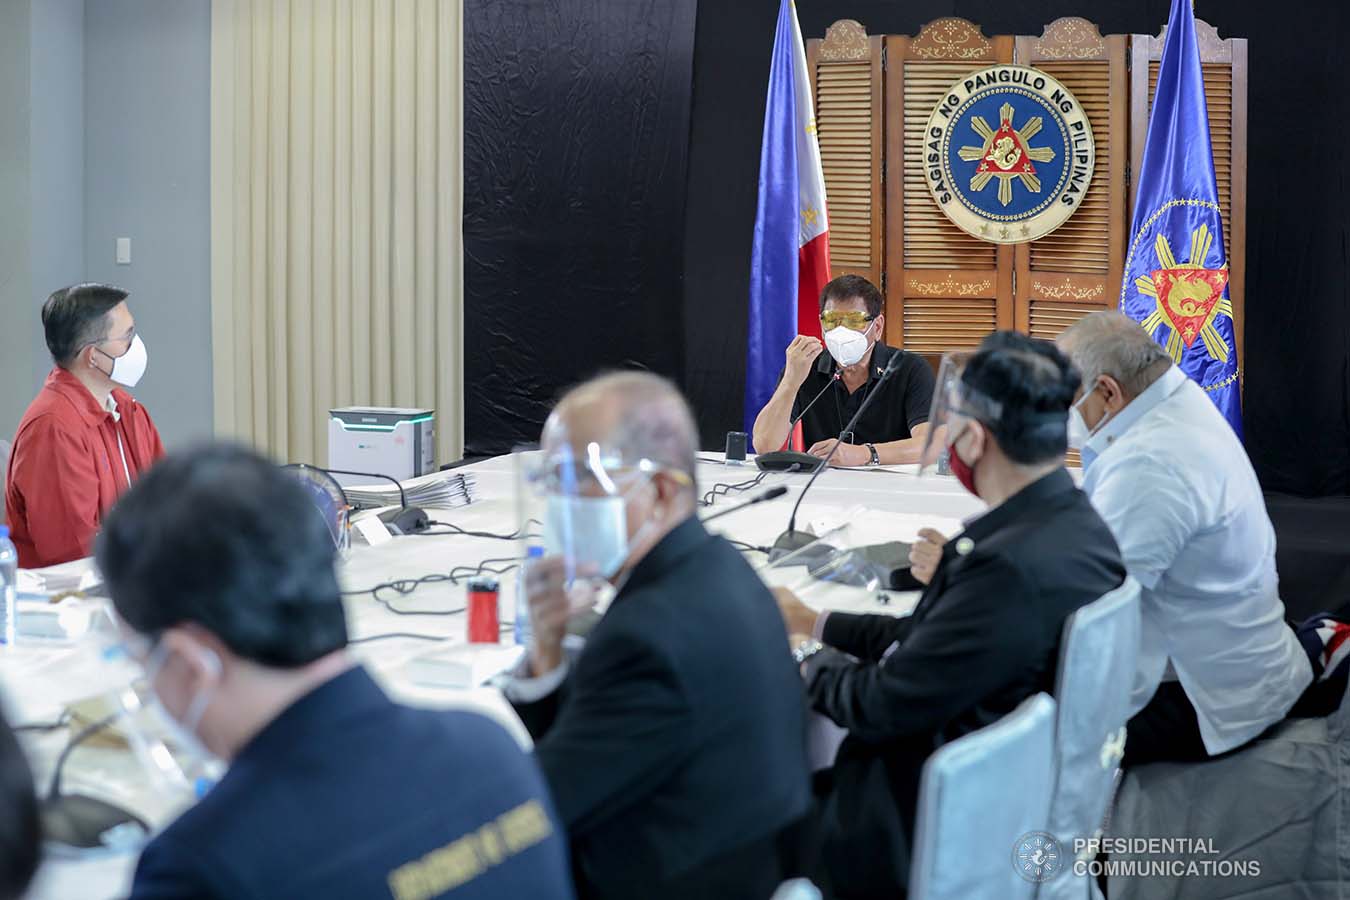 President Rodrigo Roa Duterte holds a meeting with the Inter-Agency Task Force on the Emerging Infectious Diseases (IATF-EID) core members at the Matina Enclaves in Davao City on August 24, 2020. ROBINSON NIÑAL JR./PRESIDENTIAL PHOTO